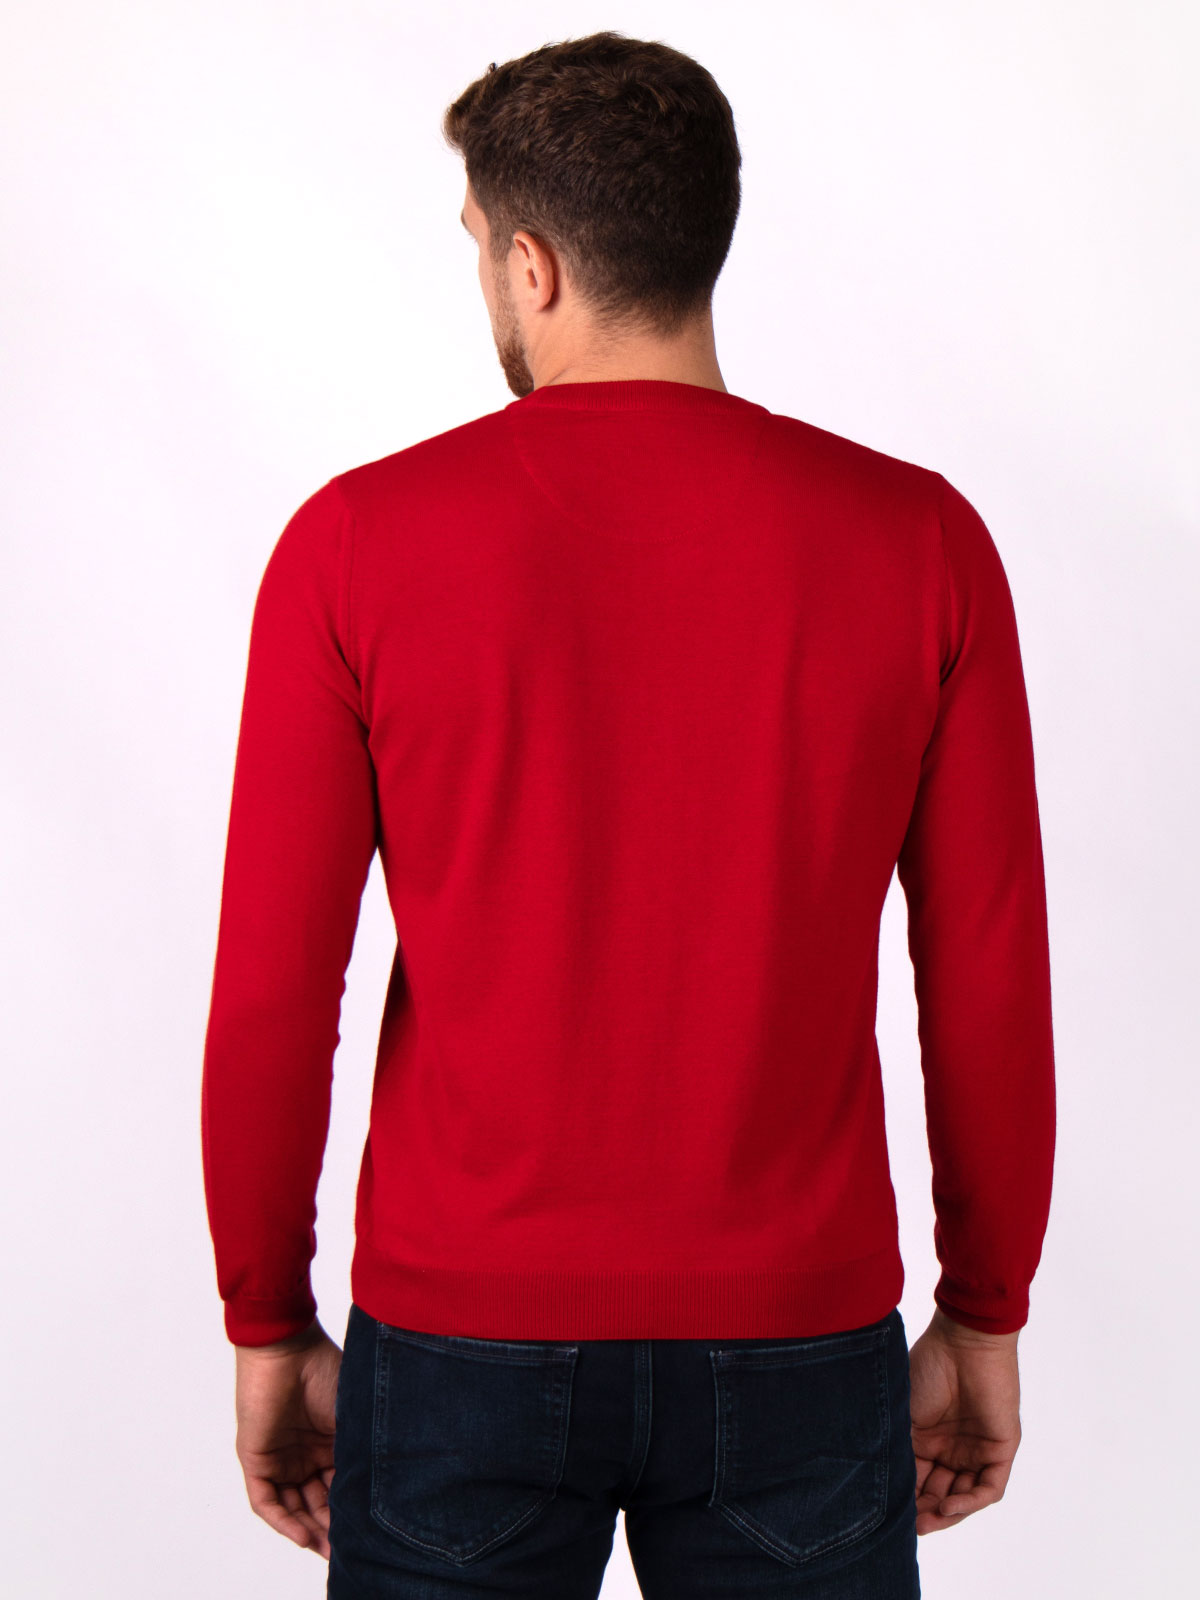 Sweater made of cotton and acrylic in r - 35289 € 27.00 img4